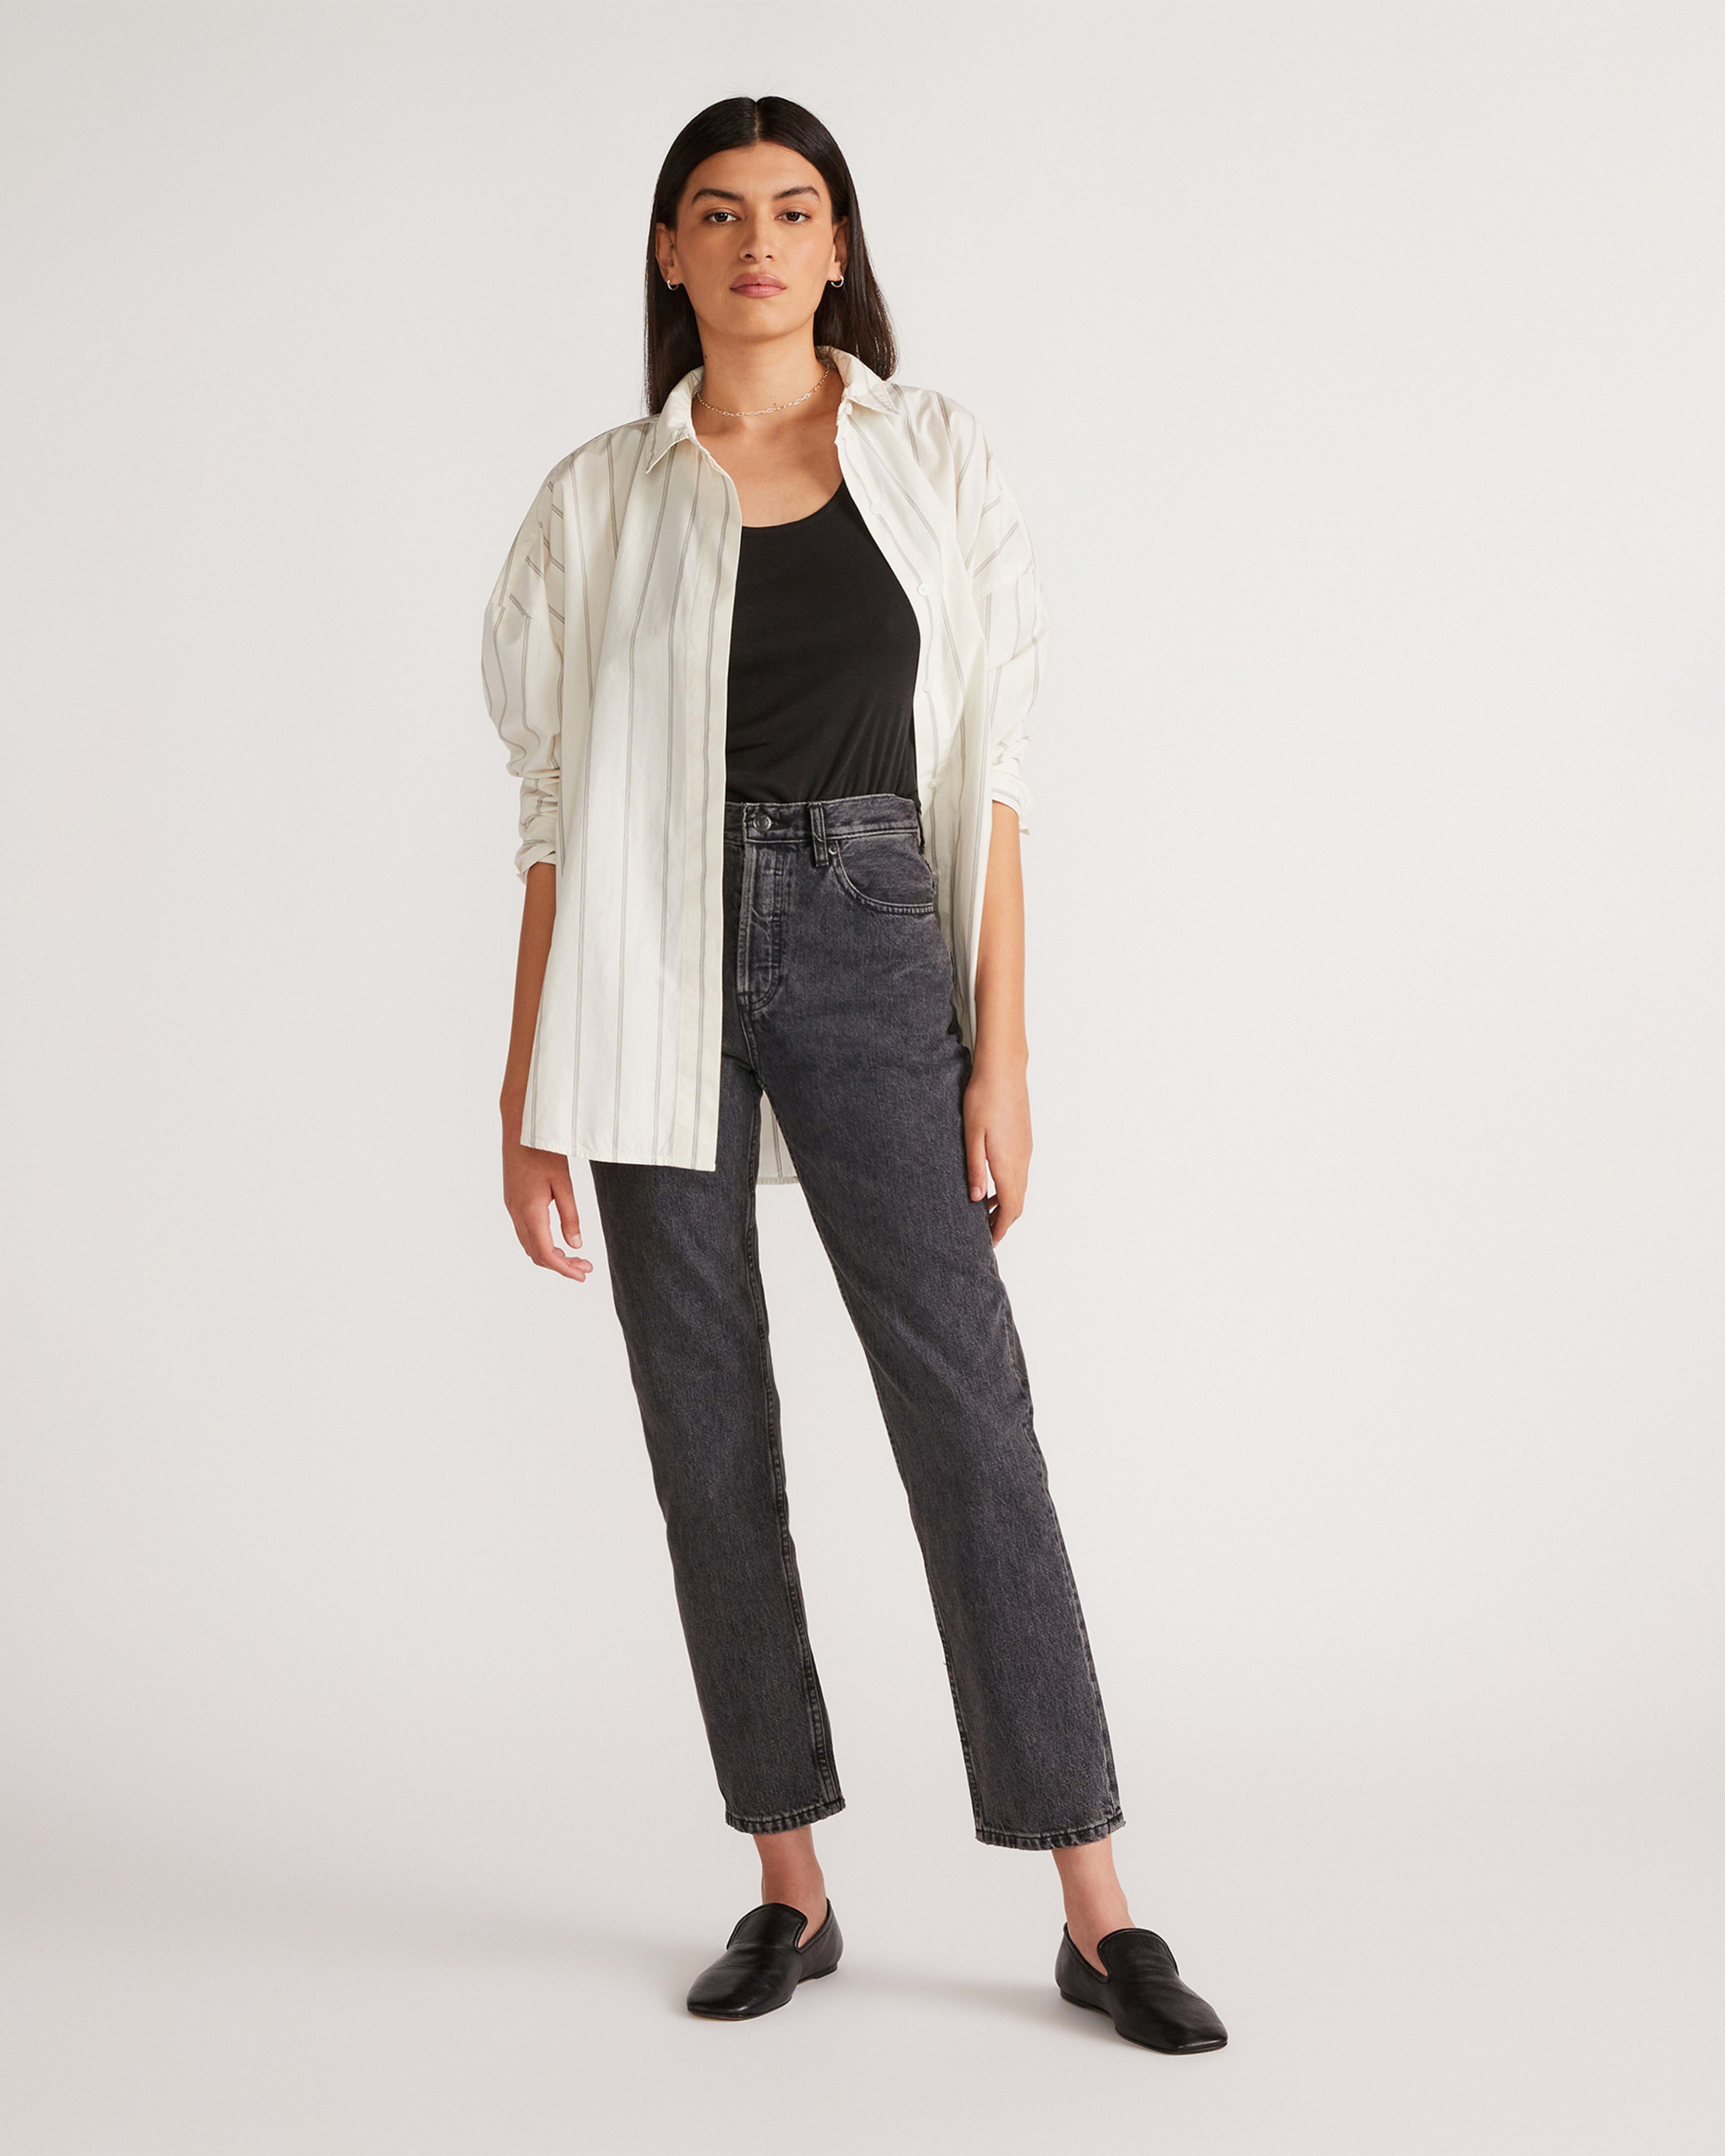 The ’90s Cheeky® Jean Washed Black – Everlane